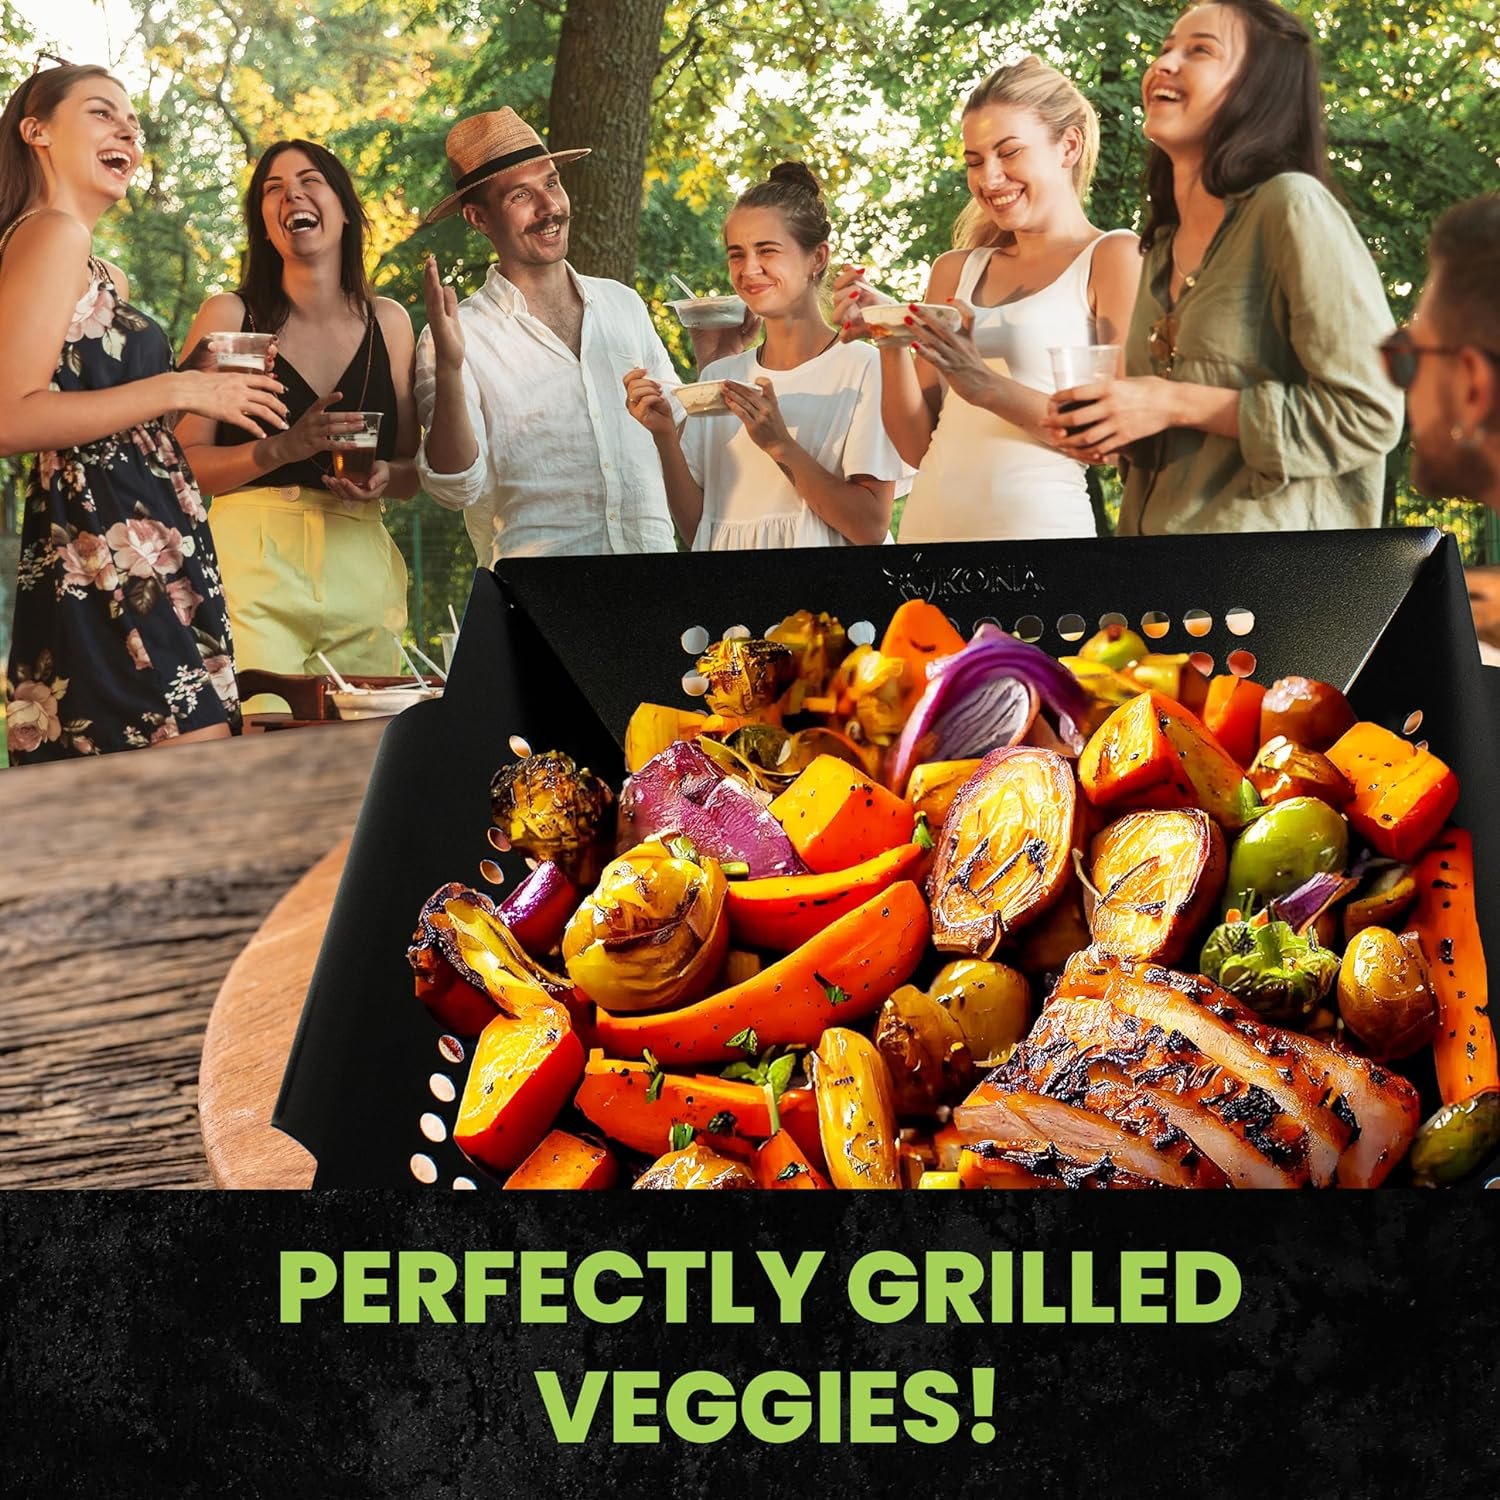 Kona Extra Large Grill Basket for Veggies - Premium Nonstick Grilling Basket/Grill Net - Essential Grilling Accessories For Outdoor Grill  BBQ, 14x13x4 Inches